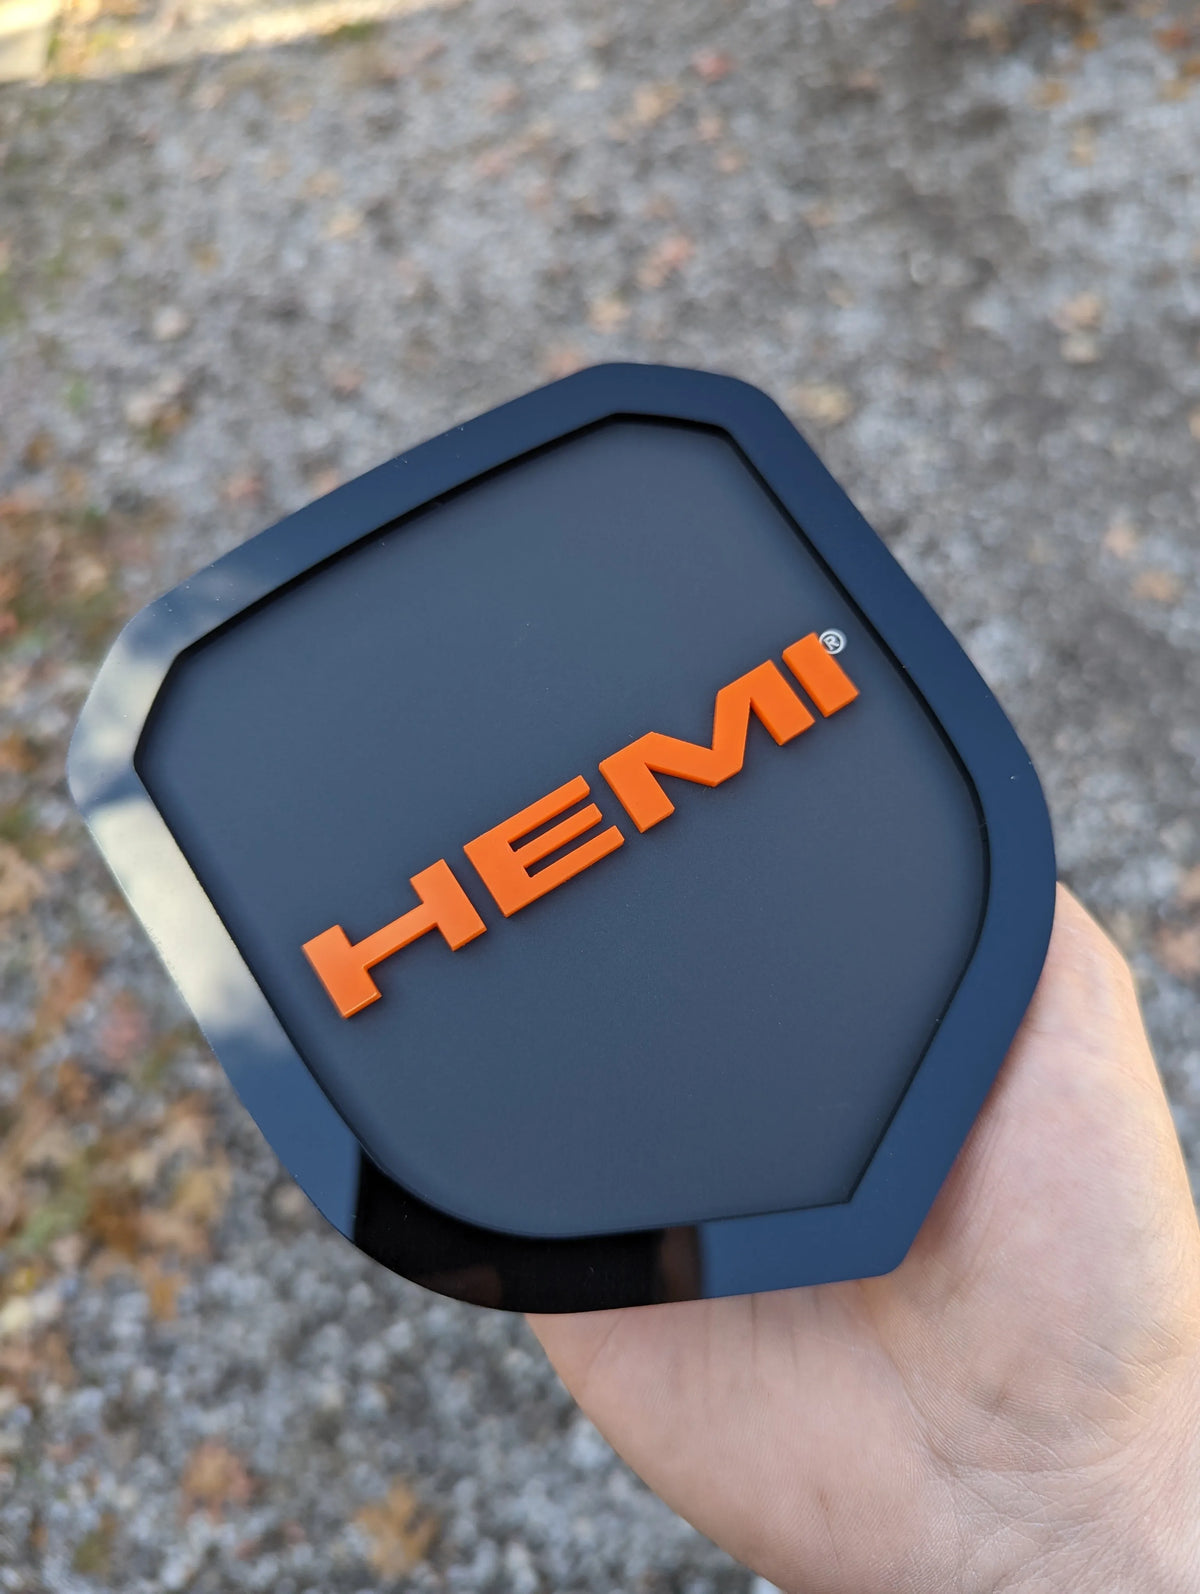 HEMI® Grille Badge - Fits 2013-2018 RAM® and 2019+ Classic Grille - 1500, 2500, 3500 - Officially Licensed Product